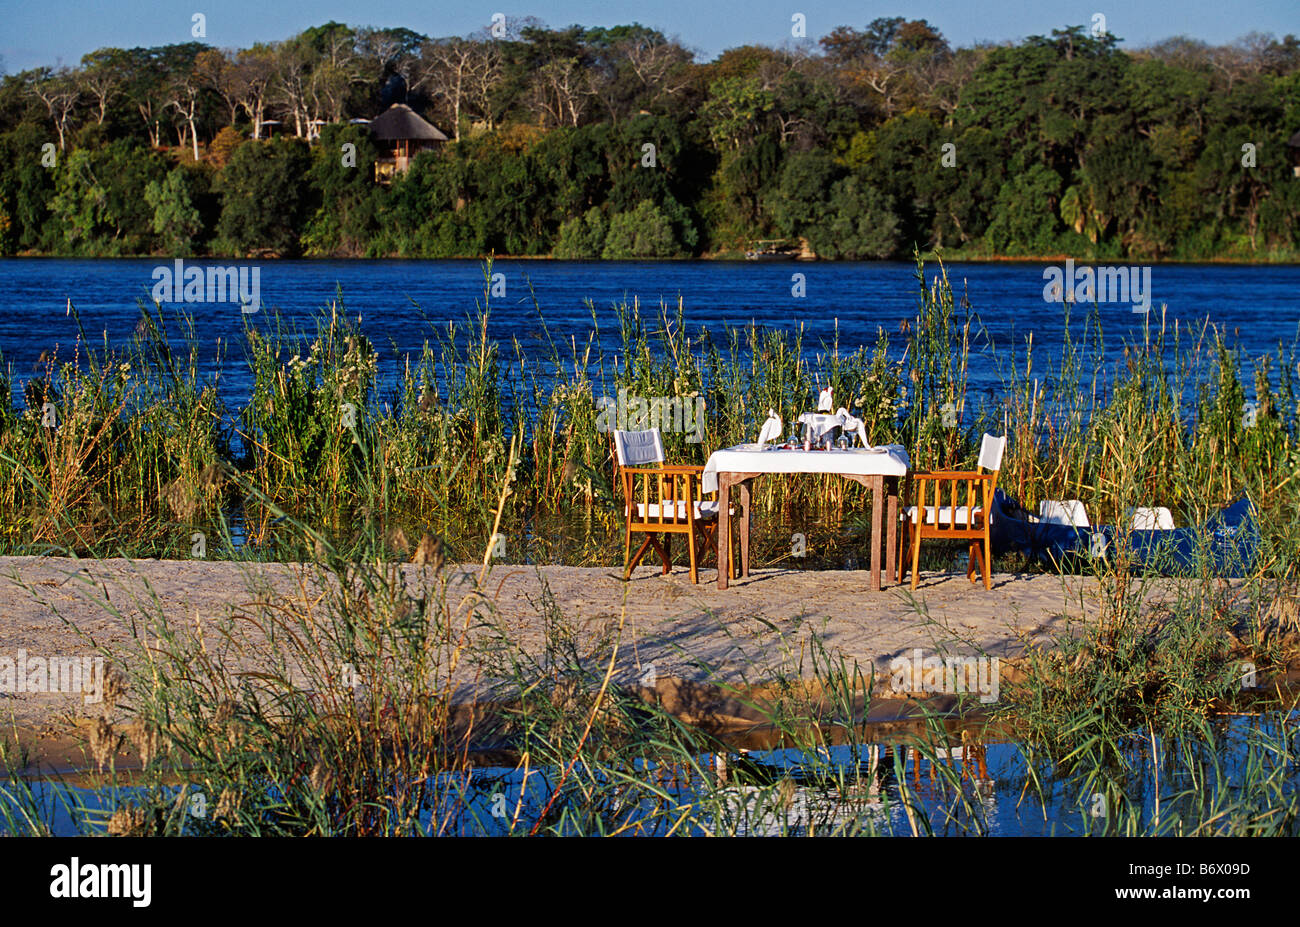 Zambia, Livingstone. The River Club - honeymoon lunch set up on island in the Zambezi River in front of the lodge. Stock Photo